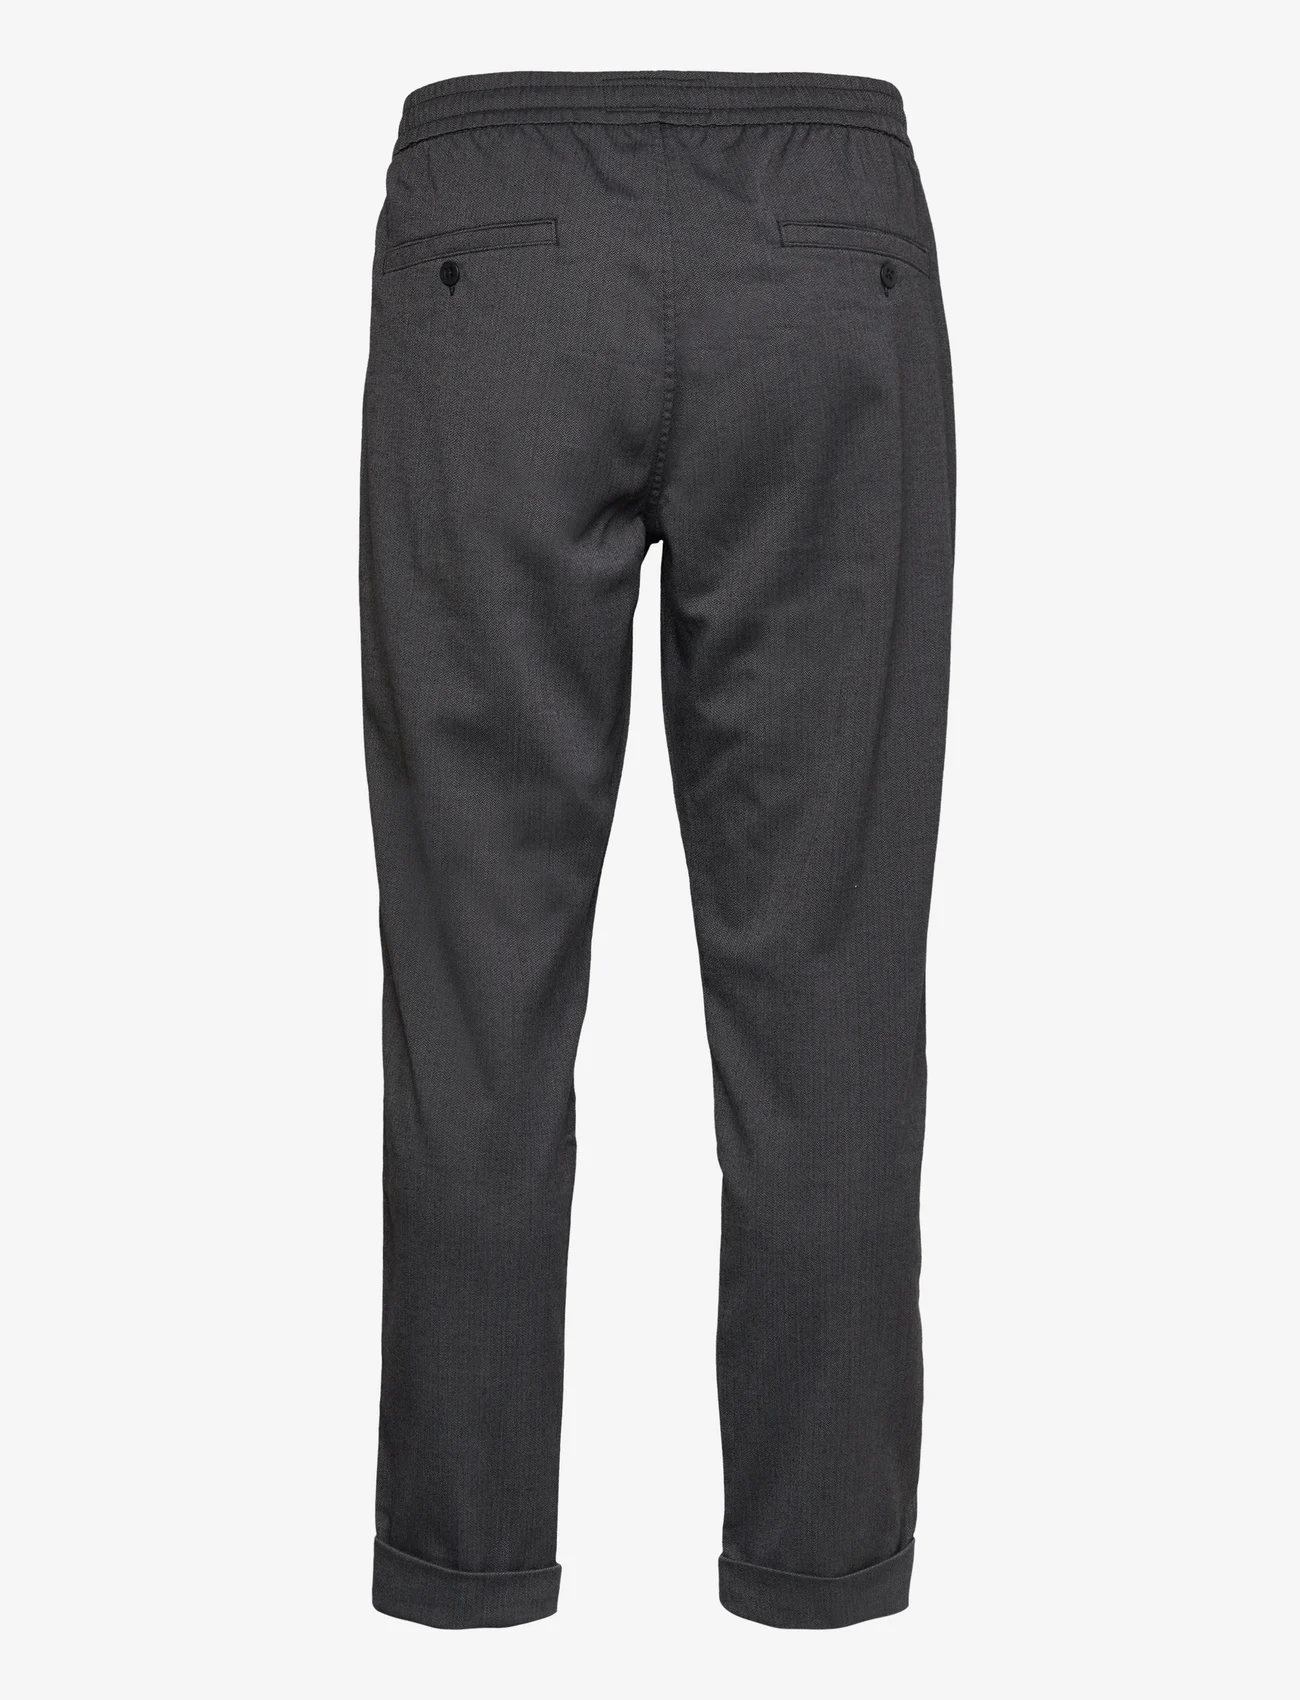 Abercrombie & Fitch - ANF MENS PANTS - rennot housut - charcoal texture - 1